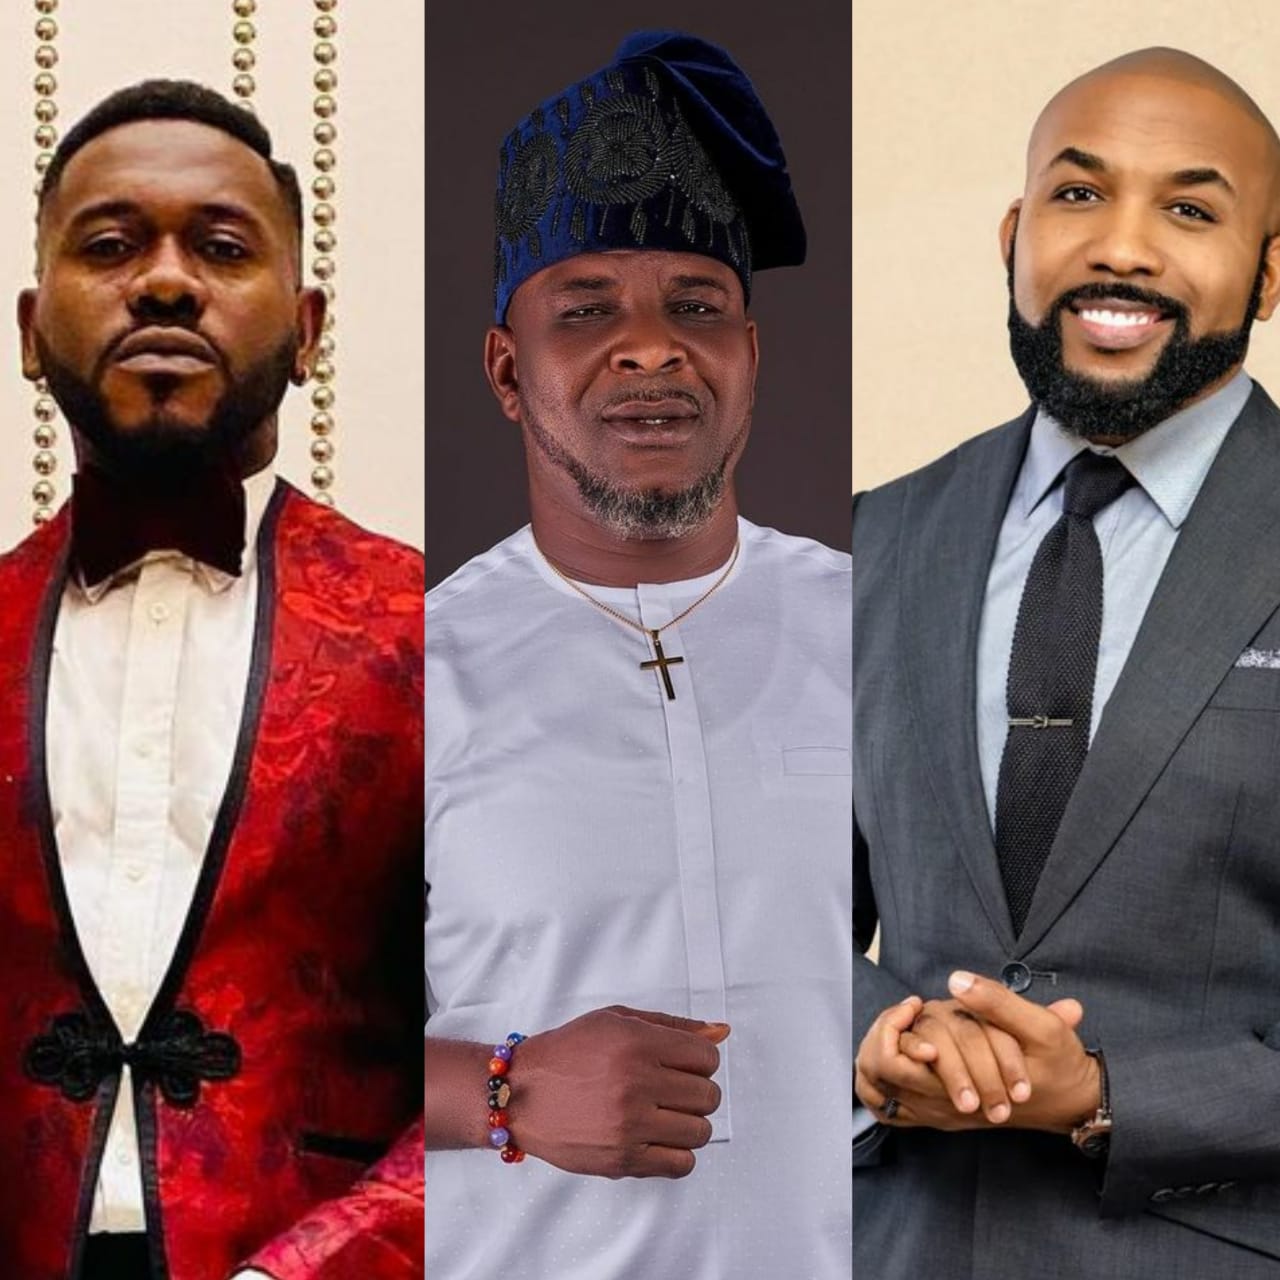 Nigerians react to actor Deyemi Okanlawon's open letter to Eti-Osa Labour party's candidate, Thaddeus Attah, in which he asked the politician to explain who he is and his qualifications